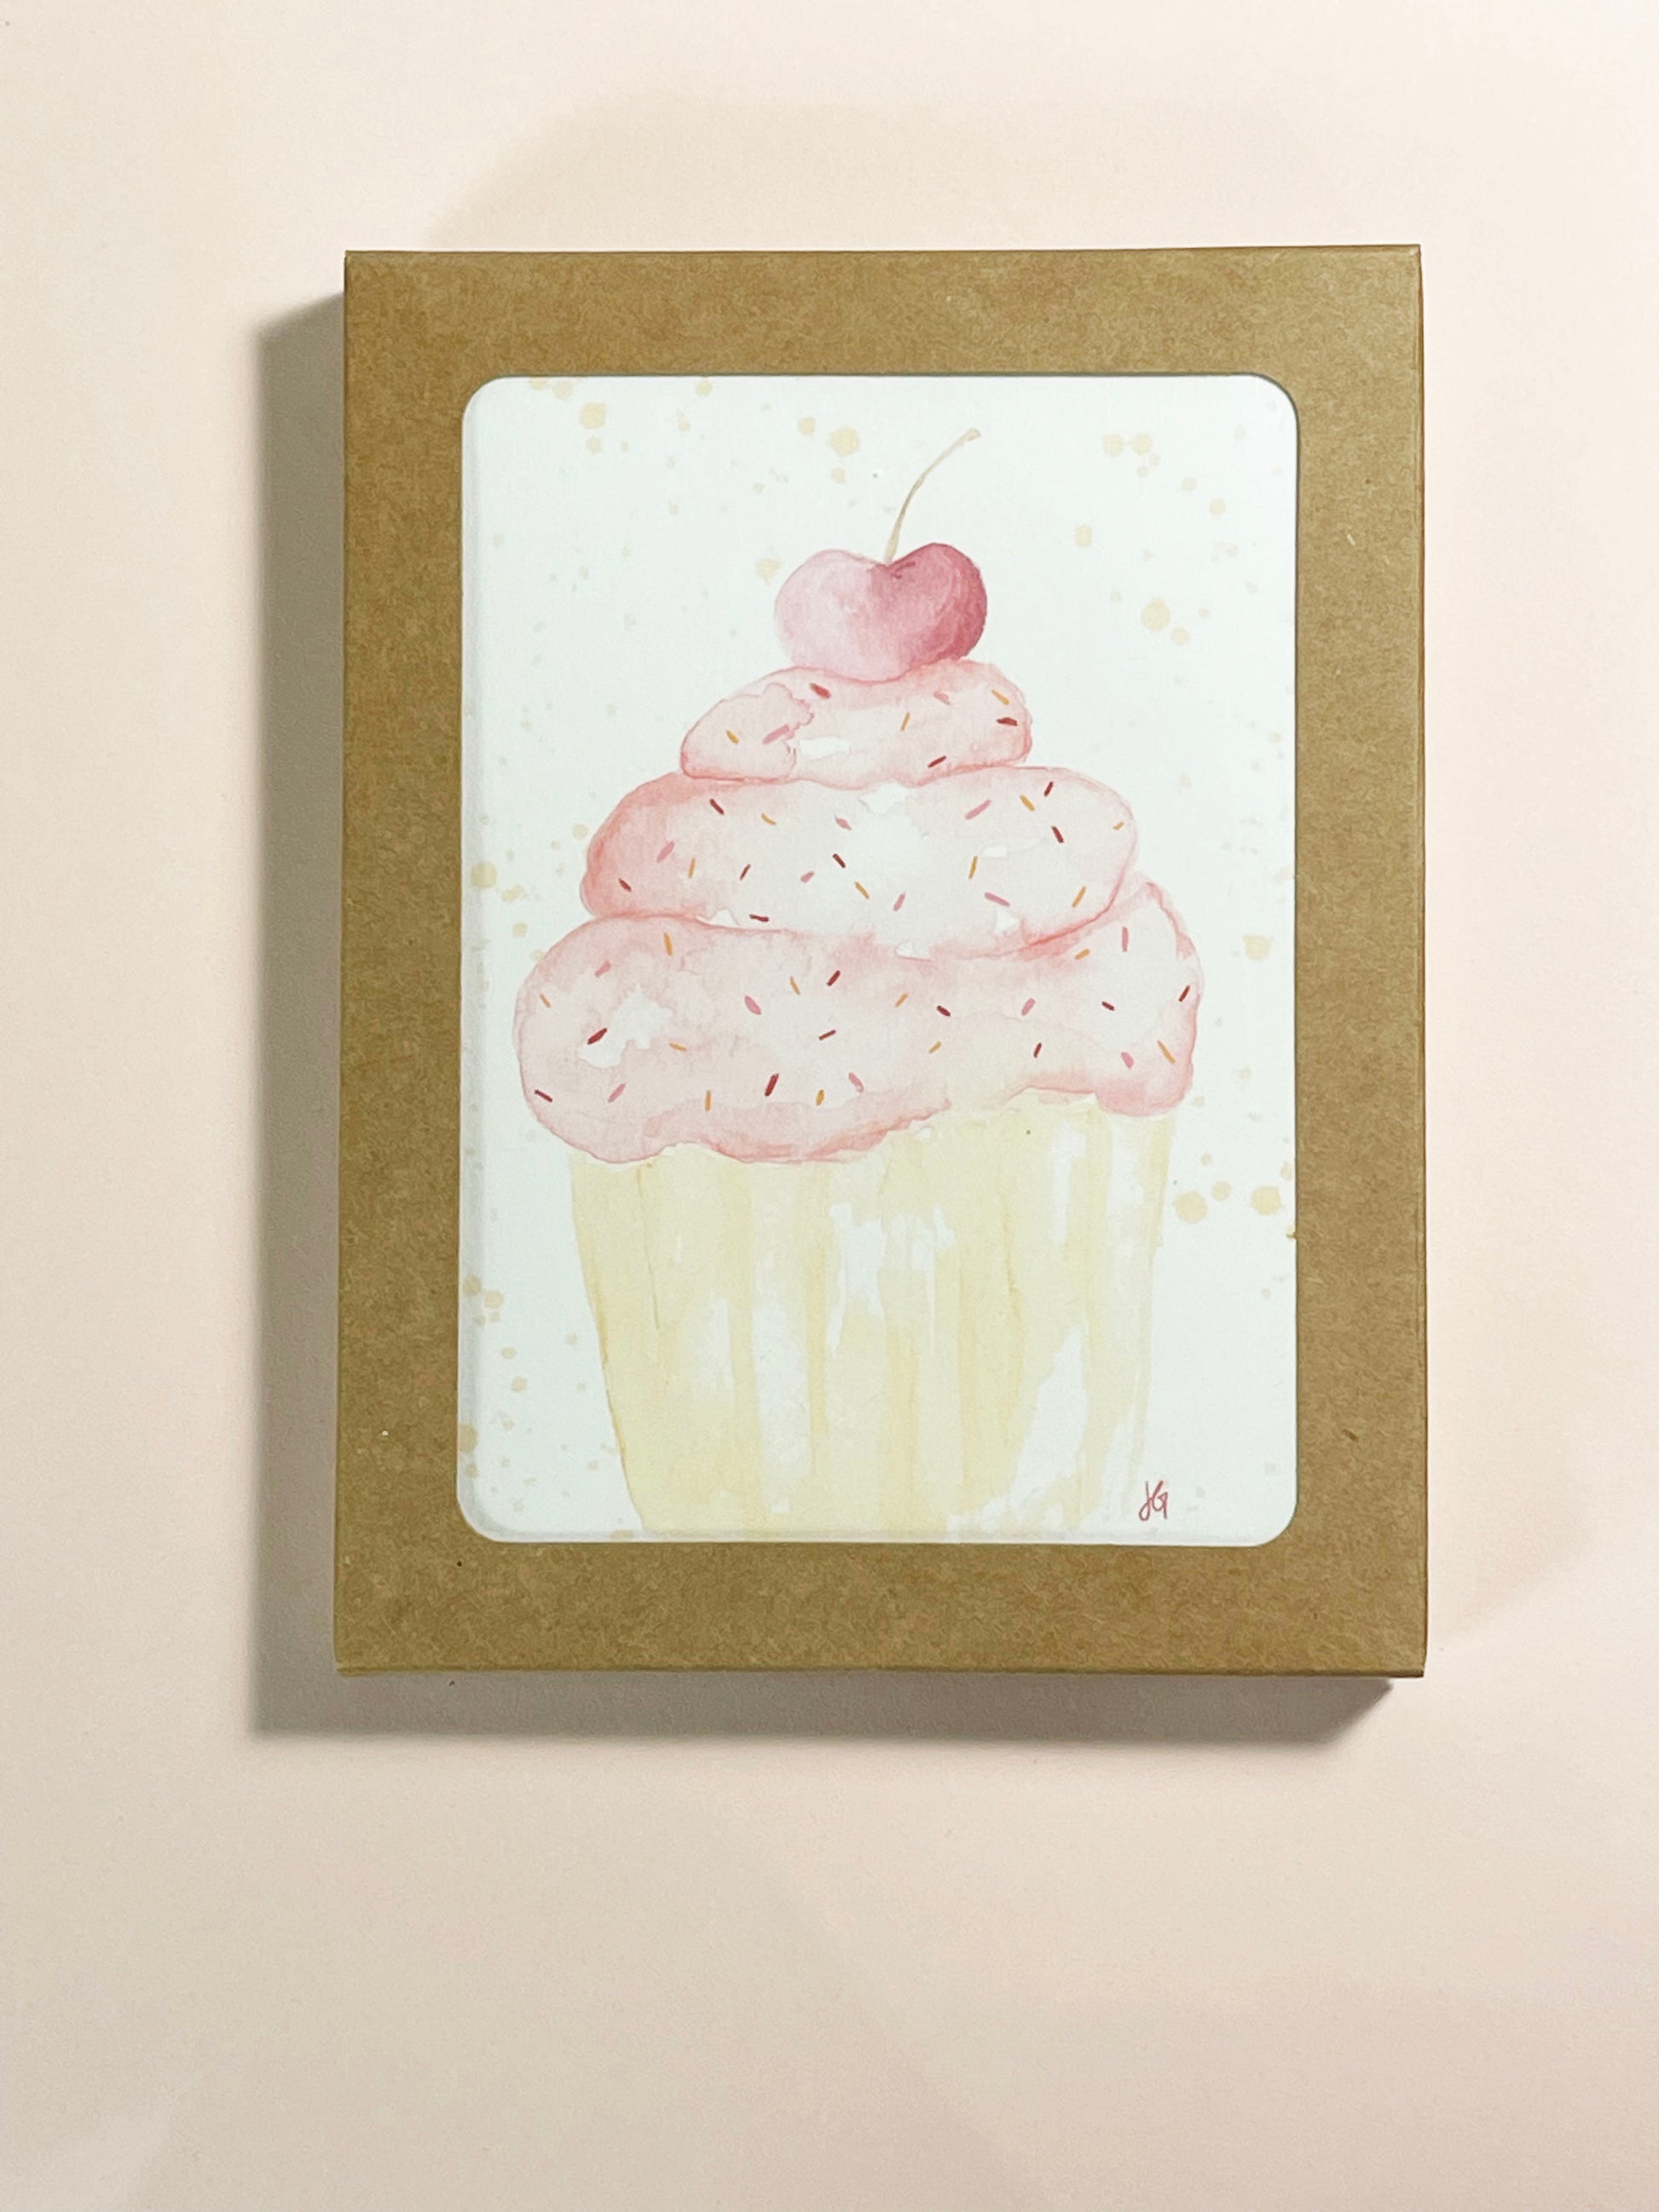 pink cupcake with a cherry on top, varying shades of pink and orange sprinkles, watercolor illustration greeting card, blank inside.  This is a boxed set a cards, 6 cards and 6 envelopes come to an order when its boxed.